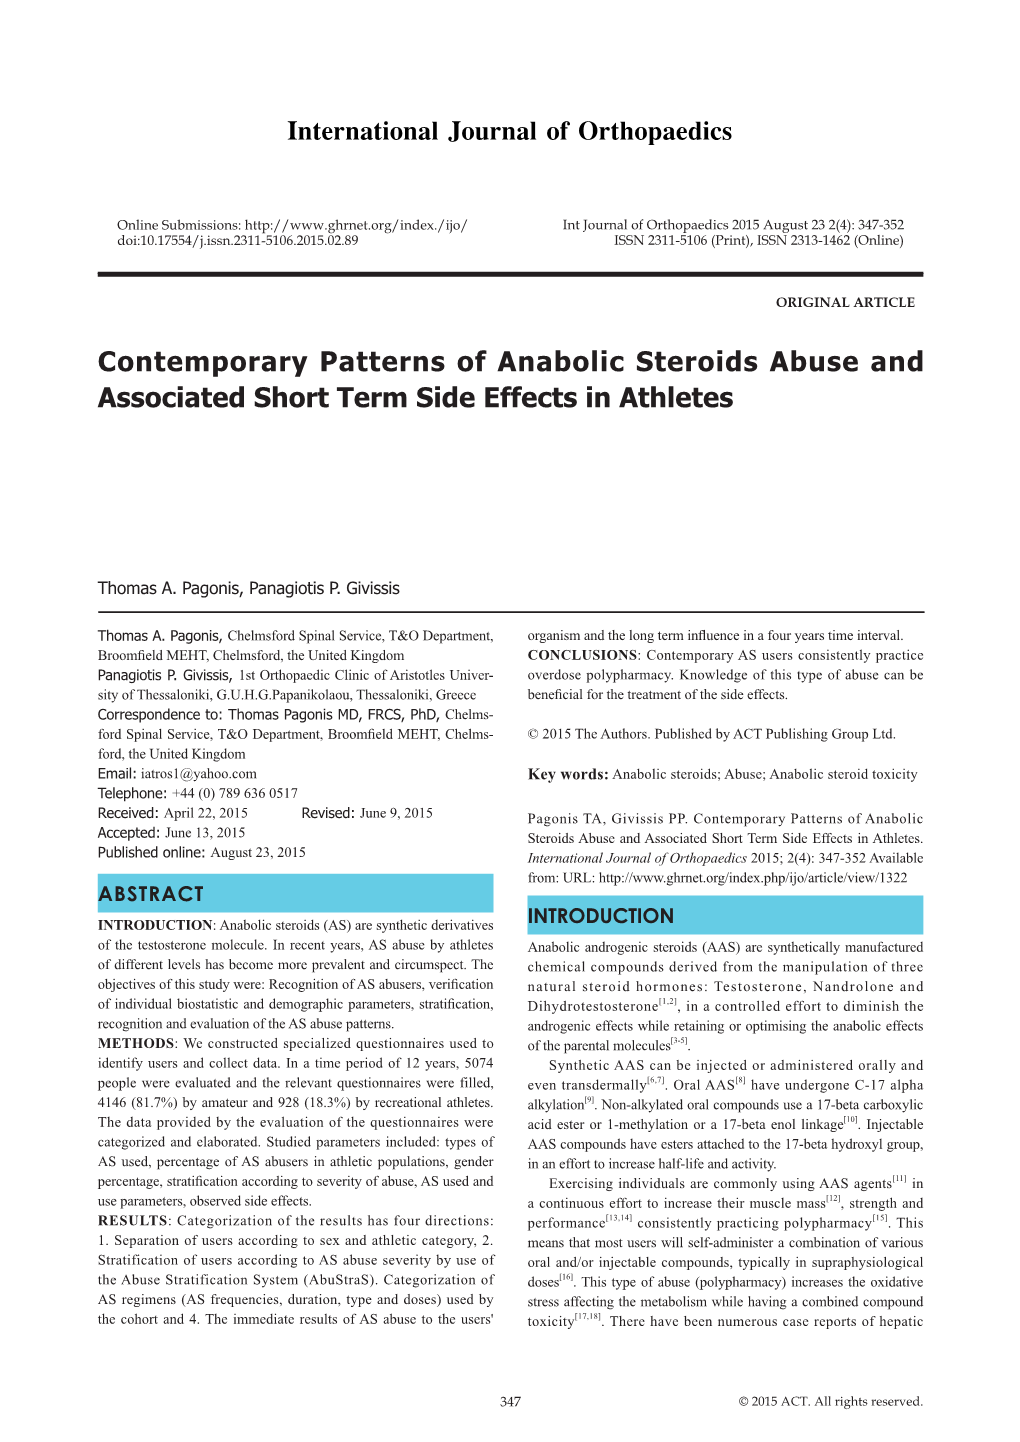 Contemporary Patterns of Anabolic Steroids Abuse and Associated Short Term Side Effects in Athletes